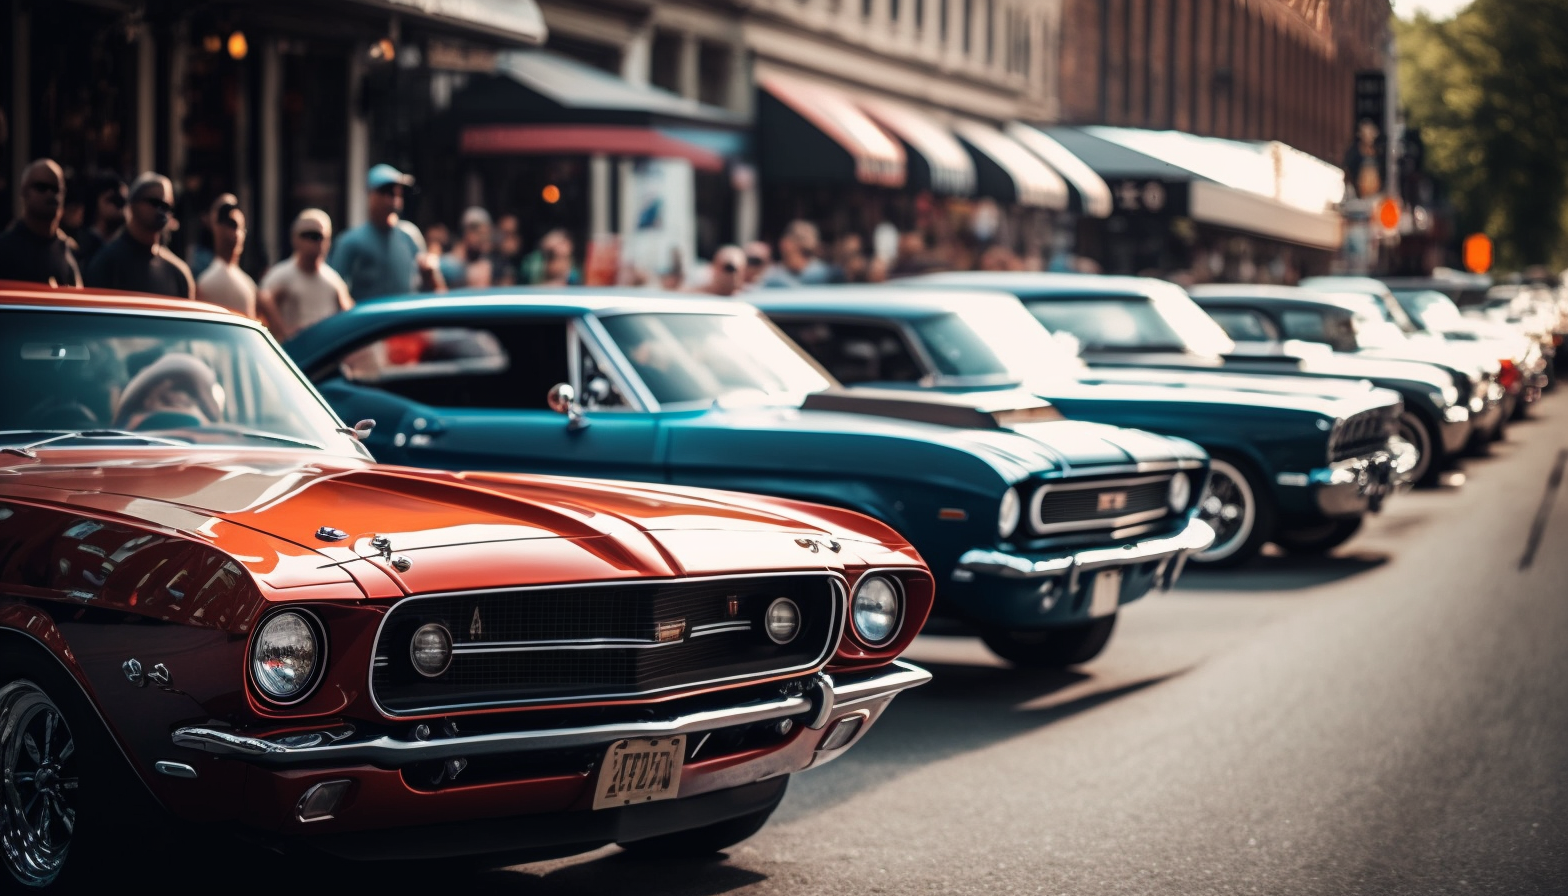 Rev Up Your Engines: Exploring the Best Car Culture and Enthusiast Automotive Communities in the US